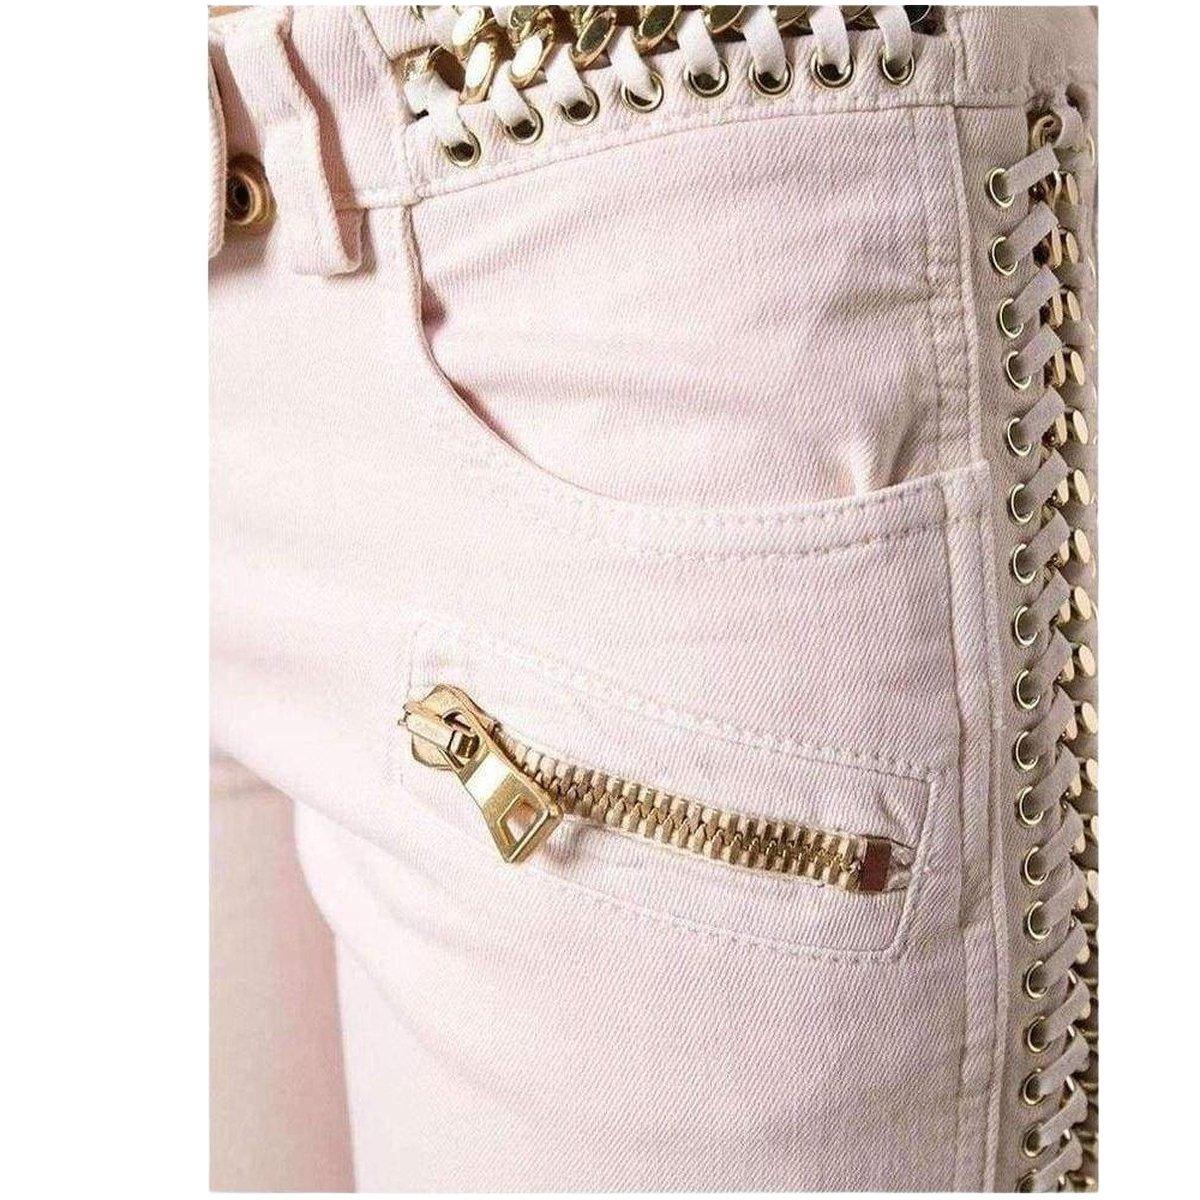 Rose pink stretch cotton lace and chain jeans from Balmain
Skinny fit
Concealed front fastening
Five pocket design
Front zip pocket
Gold-tone chain and lace detailing. 
Composition: Cotton 98%, Spandex/Elastane 2% 
Hand Wash 
Made in Italy 

Size 40